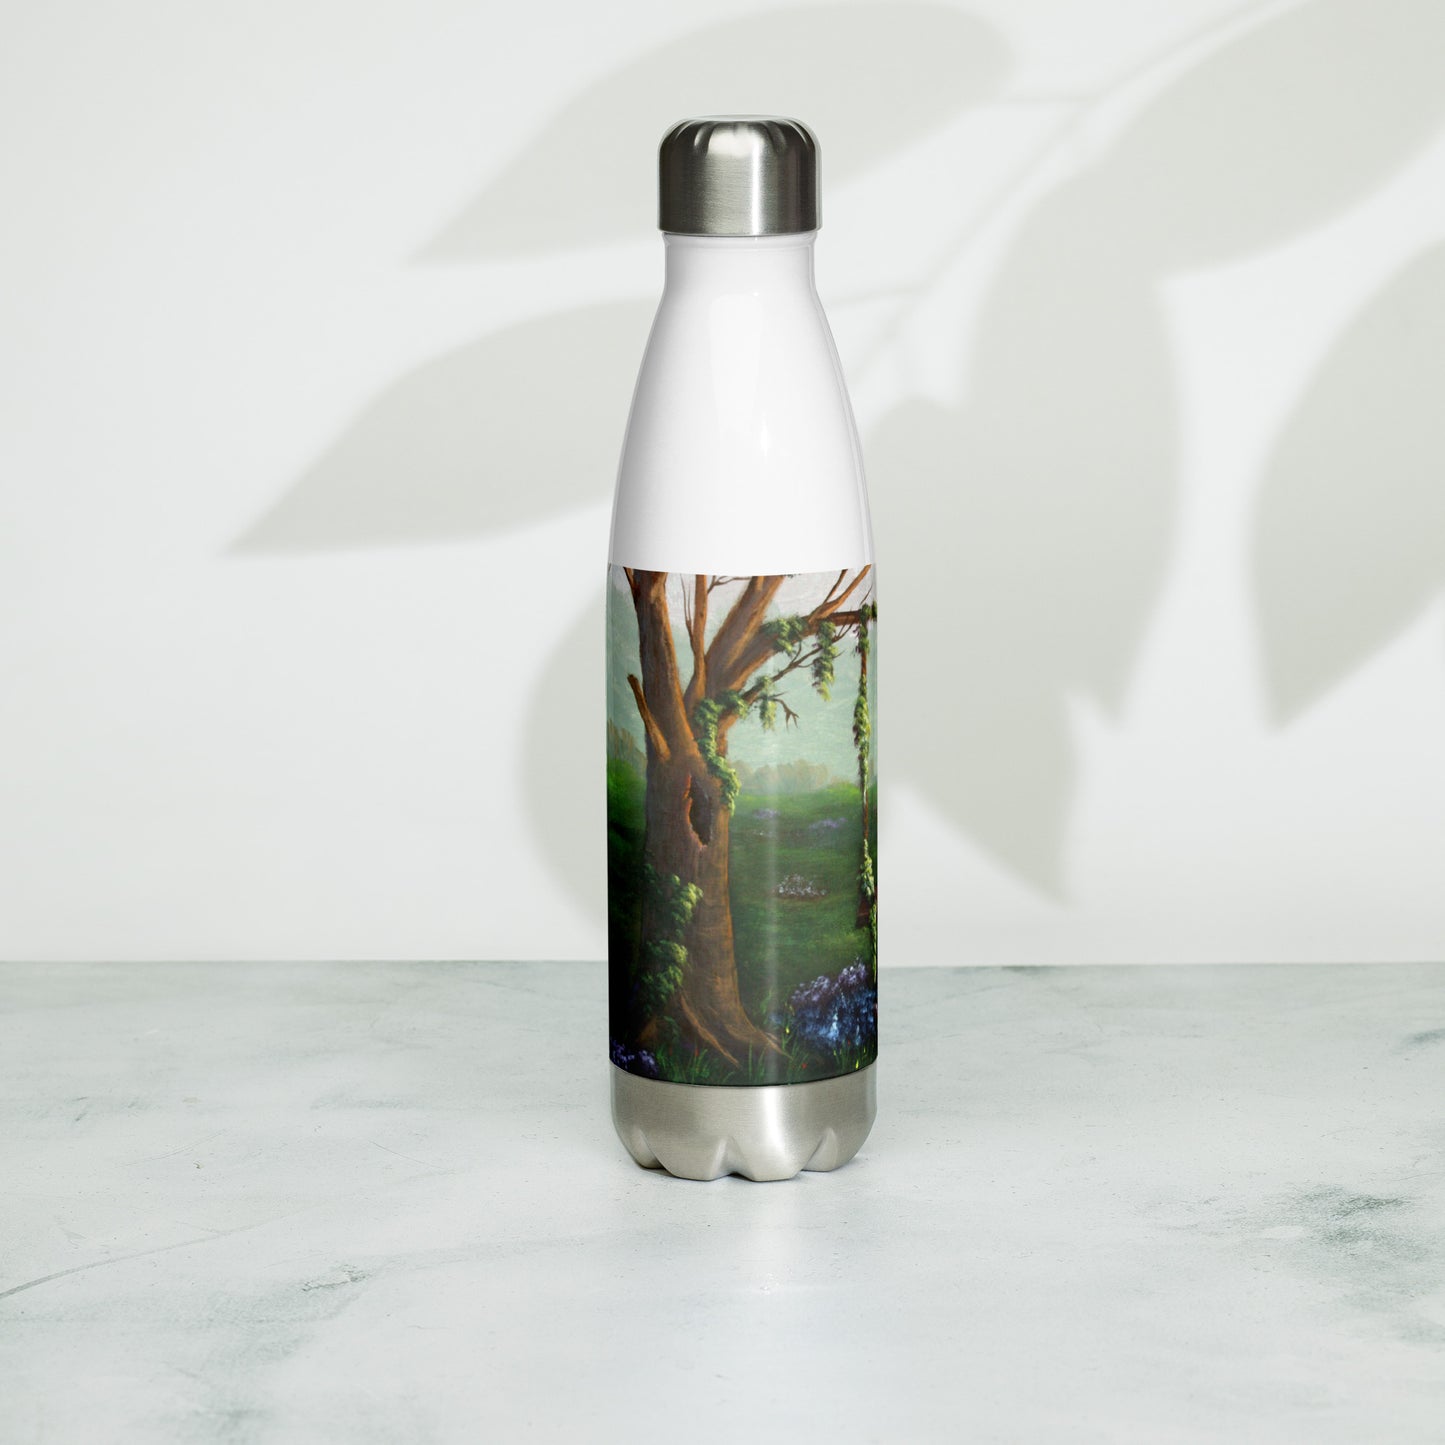 Swingin' with the Flowers stainless steel water bottle